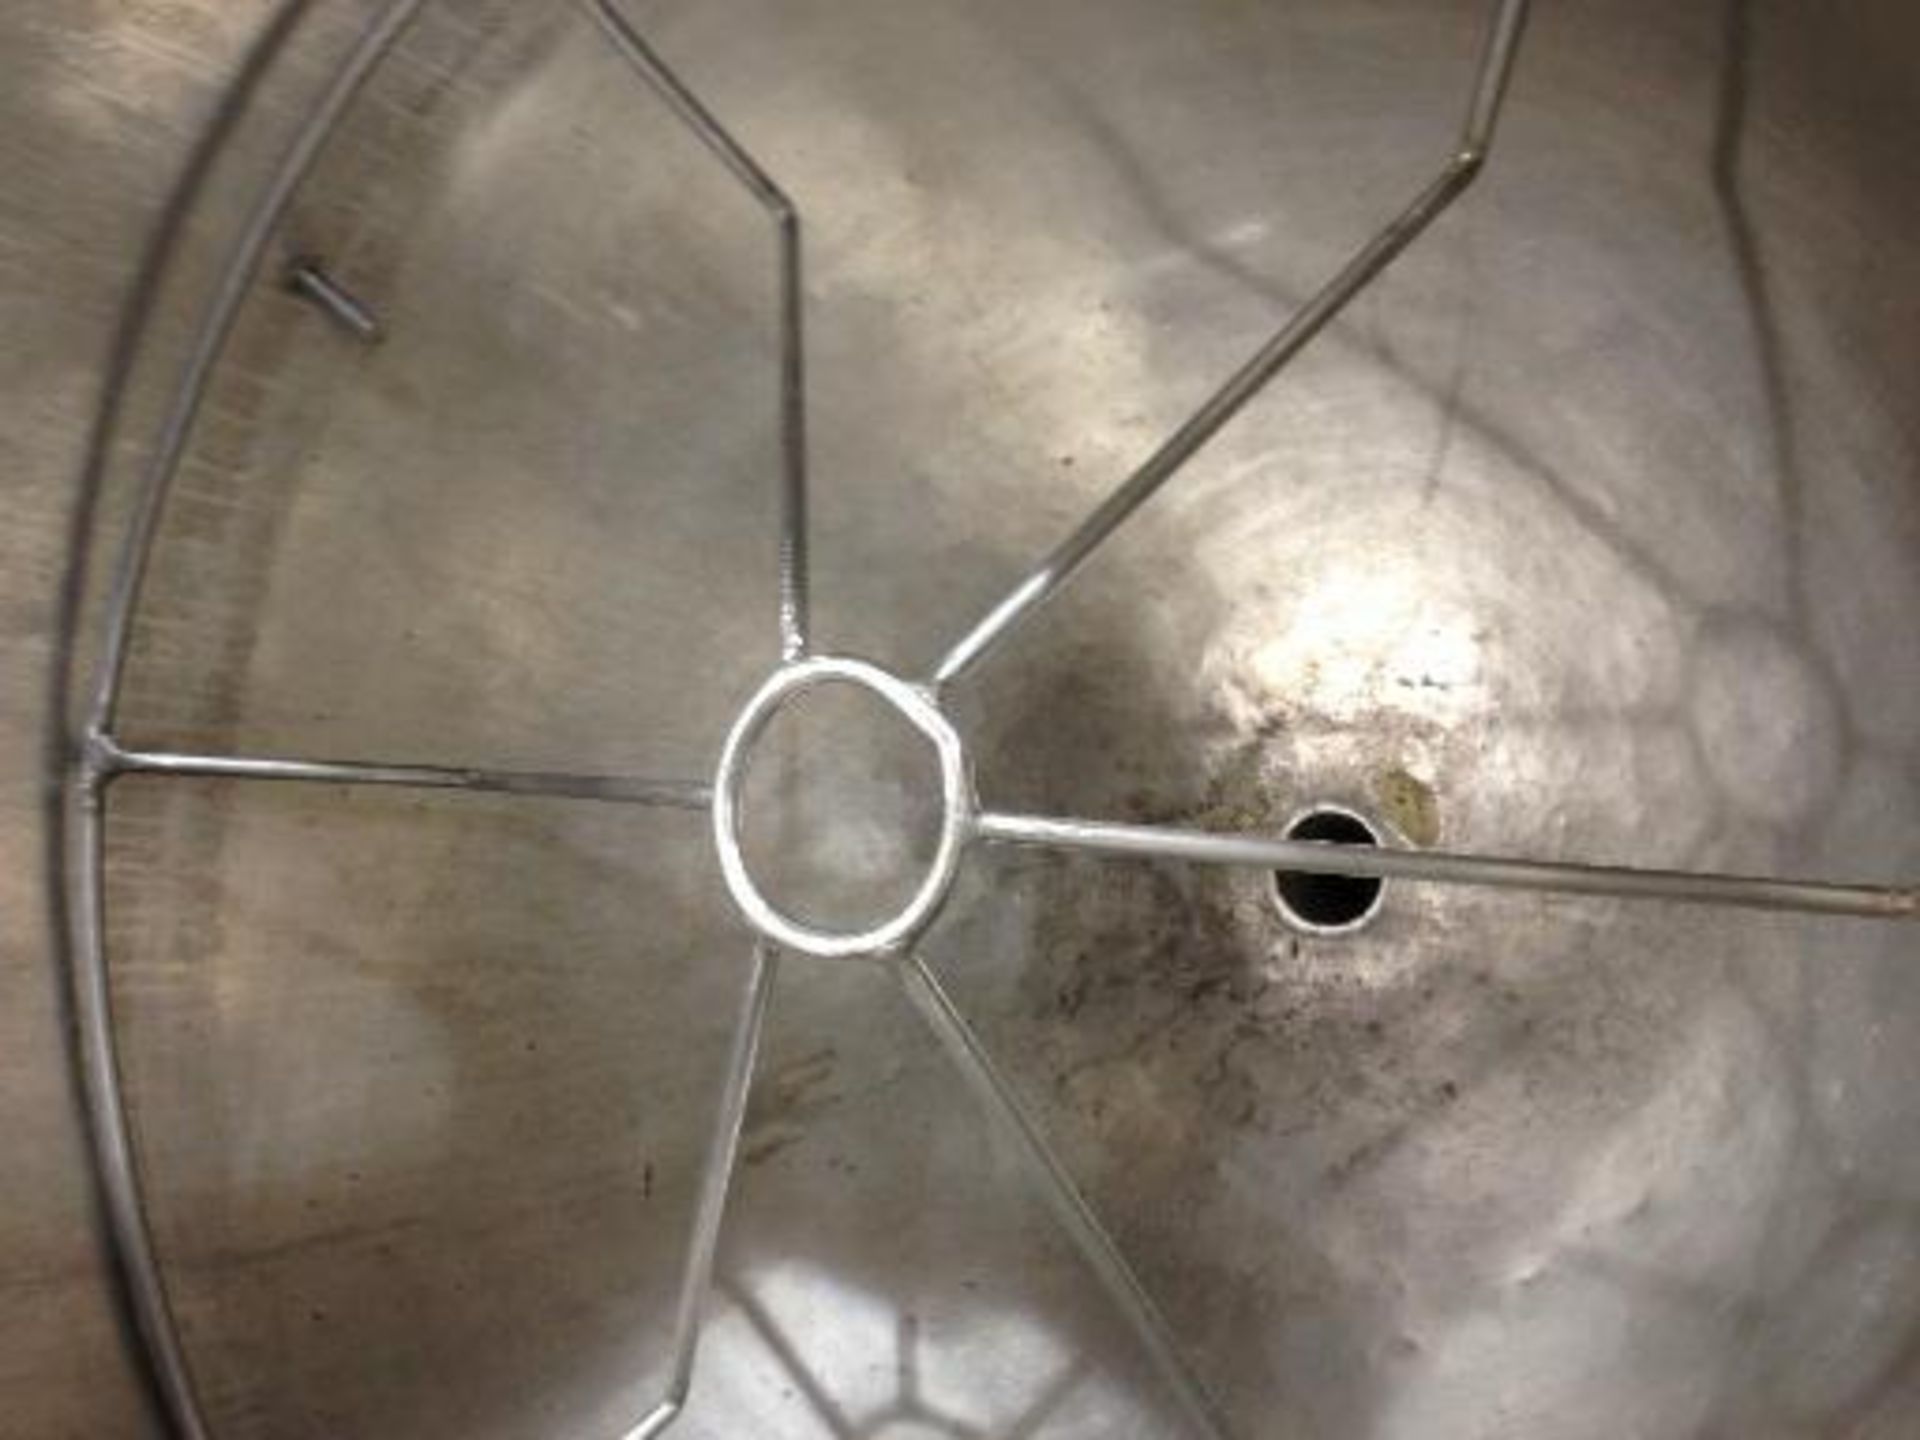 Stainless Steel Steam Jacketed Kettle for Oil, 32 inch dia x 30 inch deep, on legs Located In Macon, - Image 2 of 4